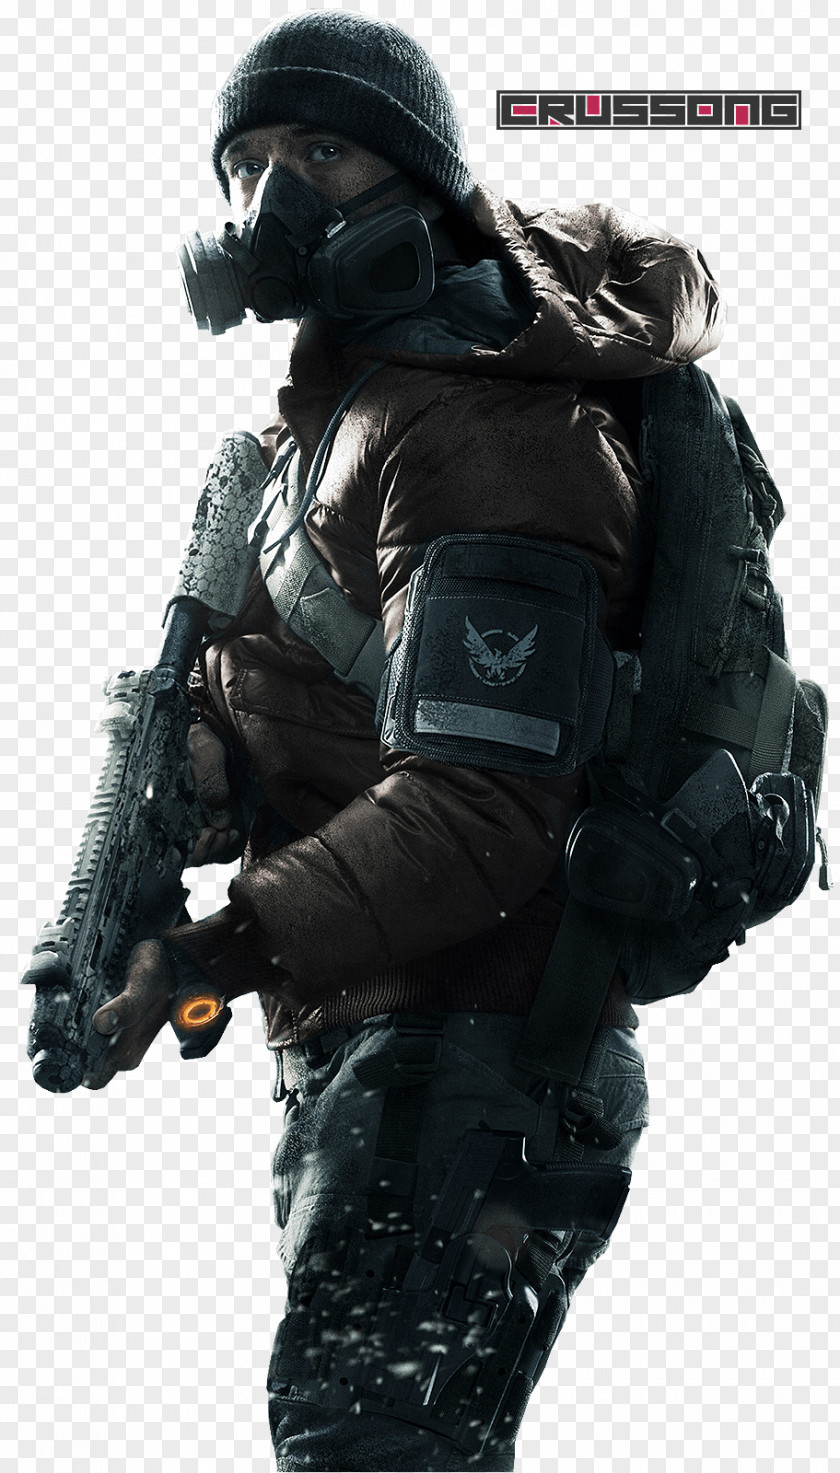 Tom Clancys Ghost Recon Clancy's The Division IPhone 5 7 Desktop Wallpaper Rainbow Six Siege PNG